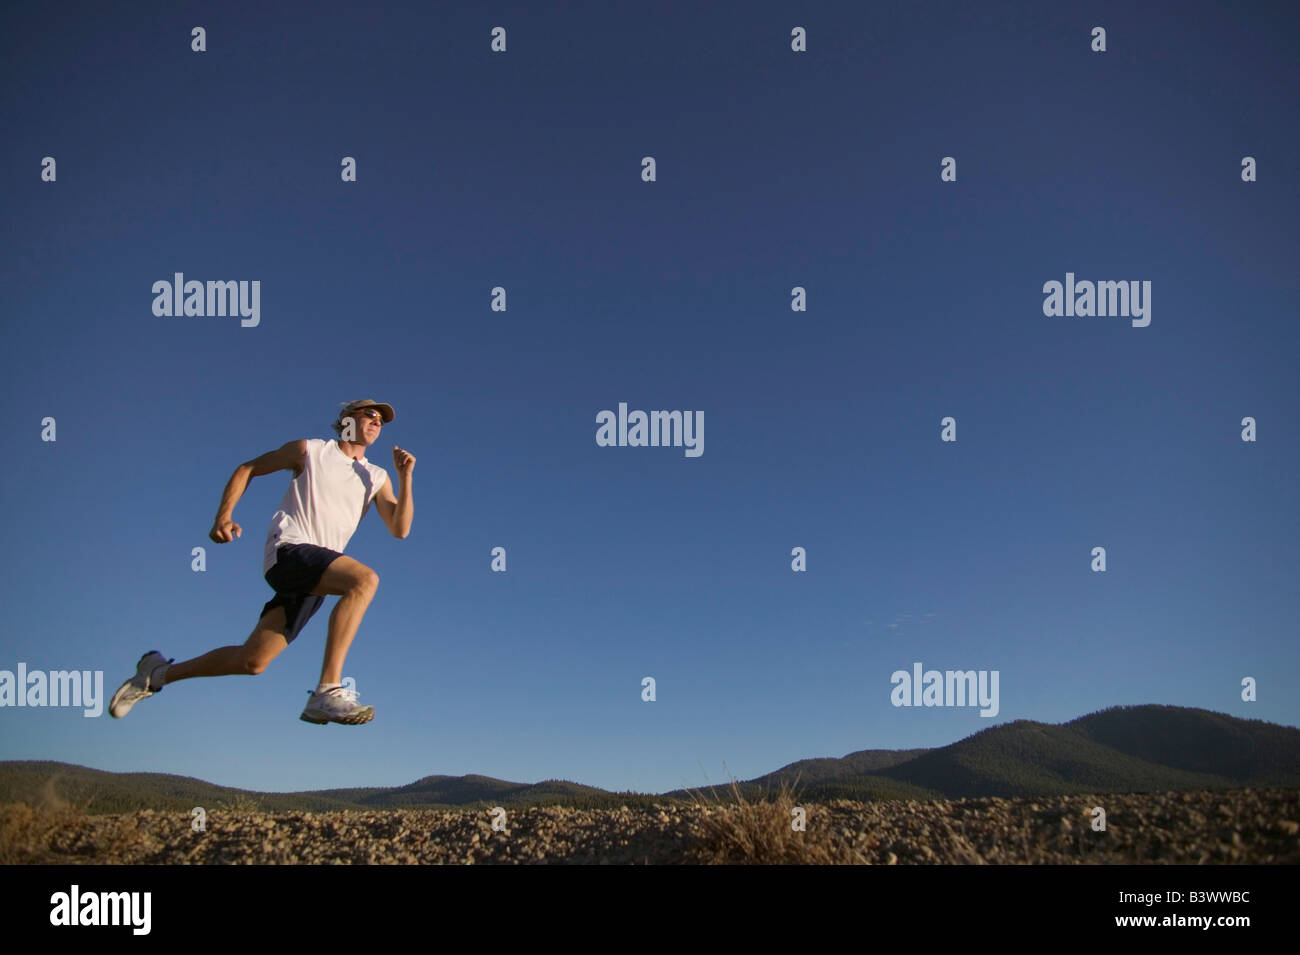 Low angle view of a man running in a field Stock Photo